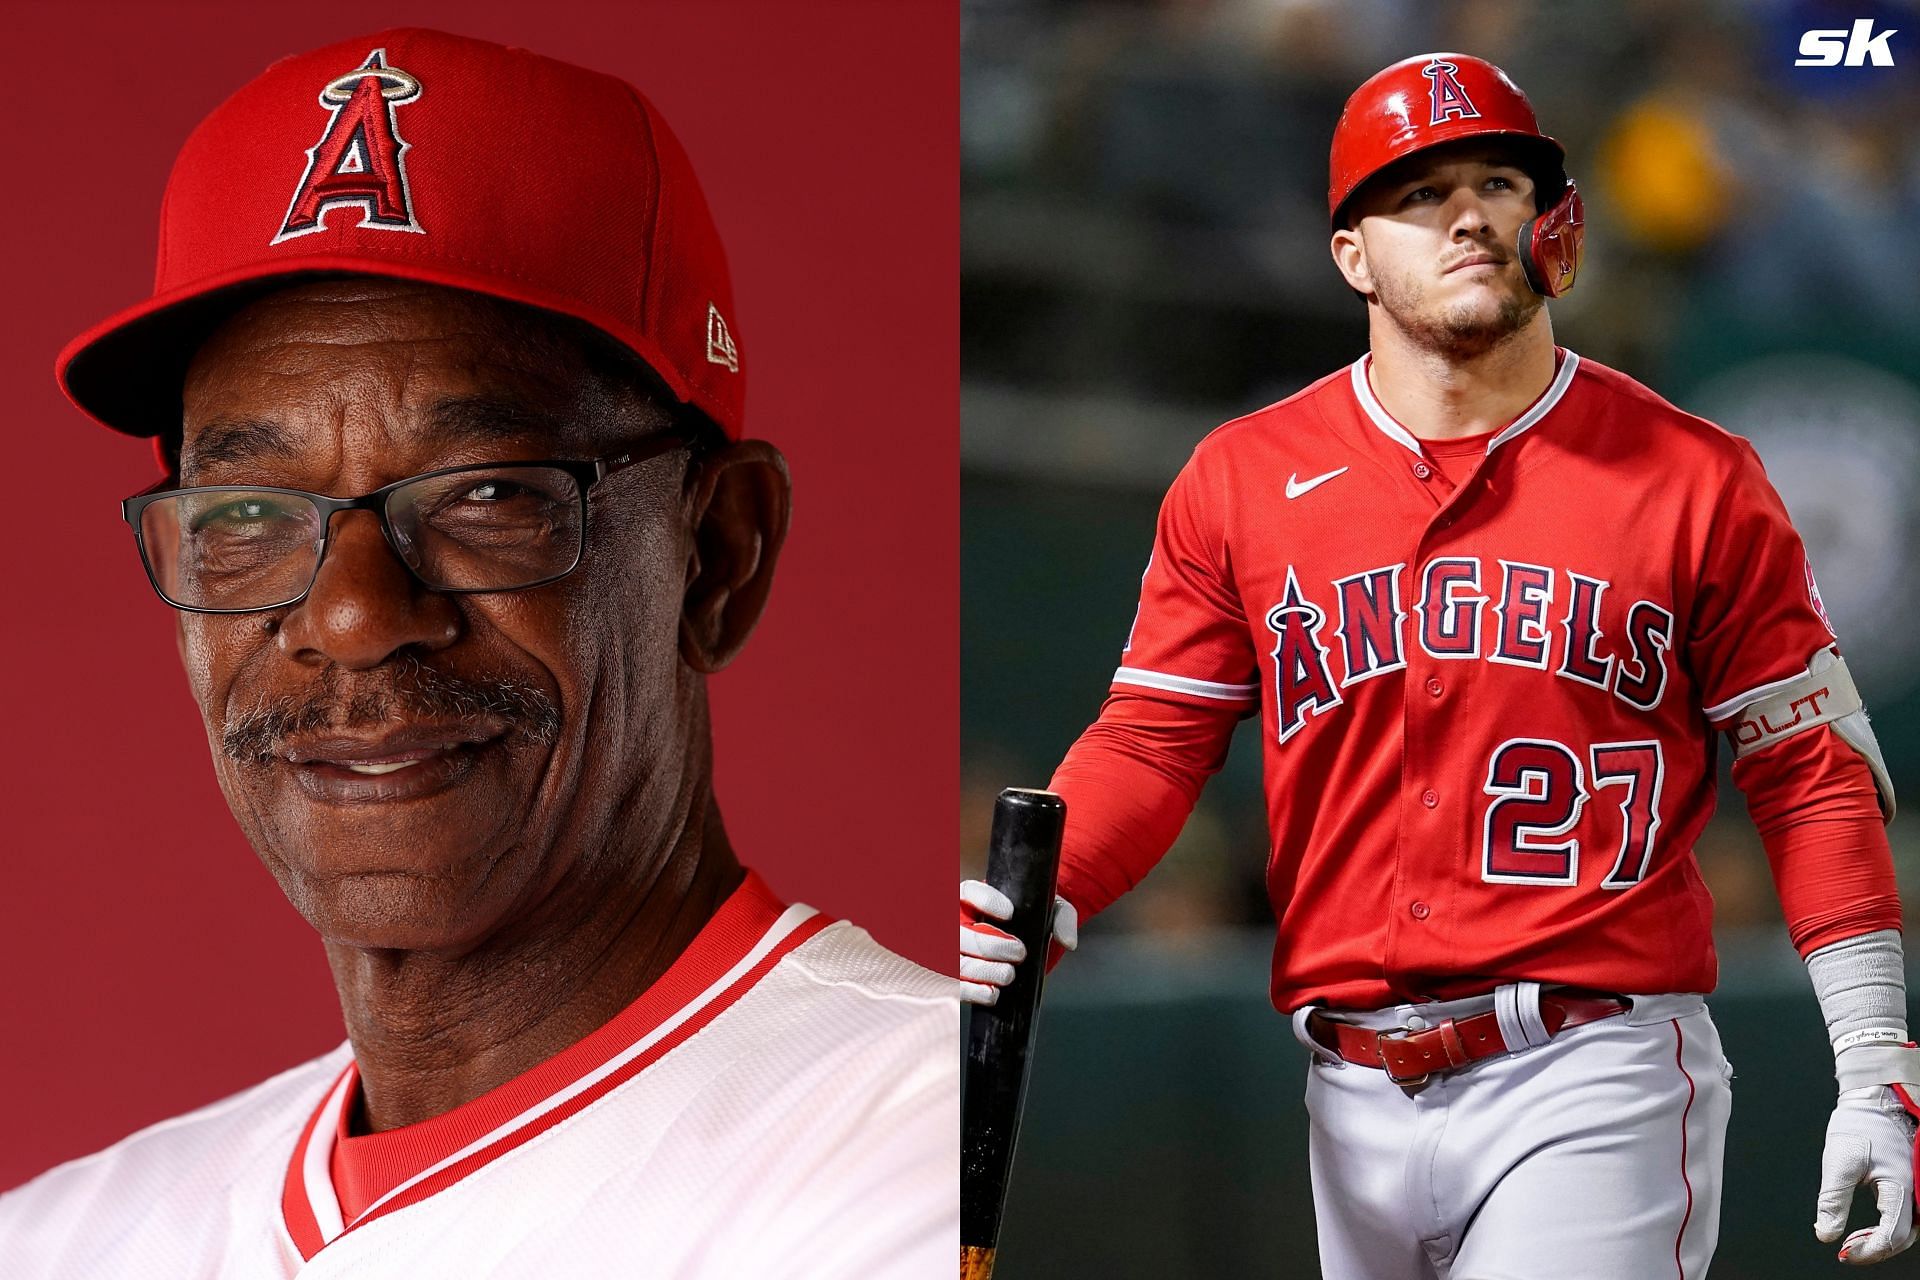 Mike Trout to play as a DH according to Ron Washington.